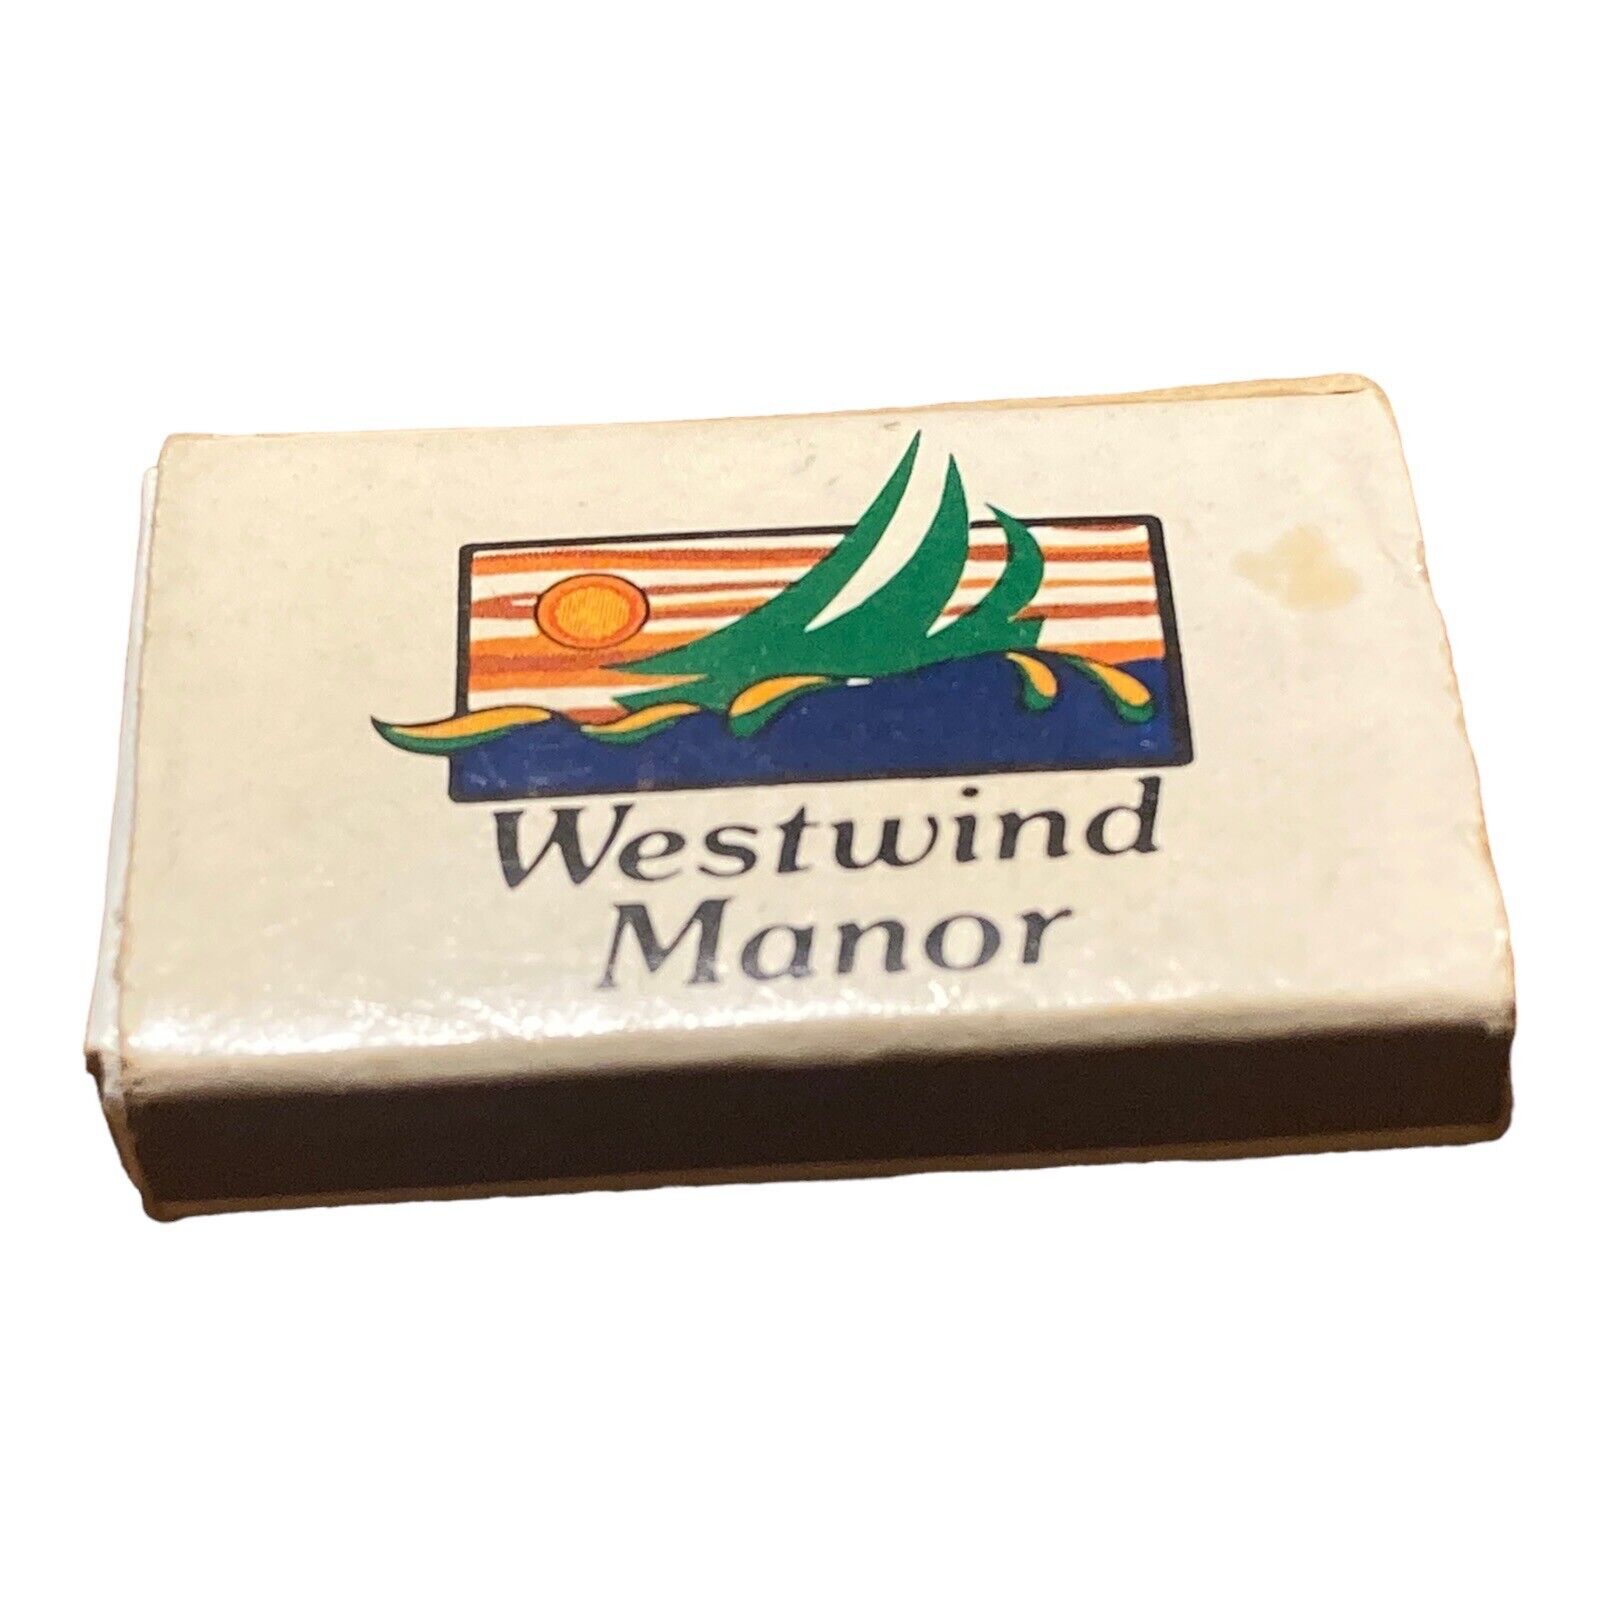 Vintage Westwind Manor Bay Landing Bay Gold Country Club Matchbook Matches Match